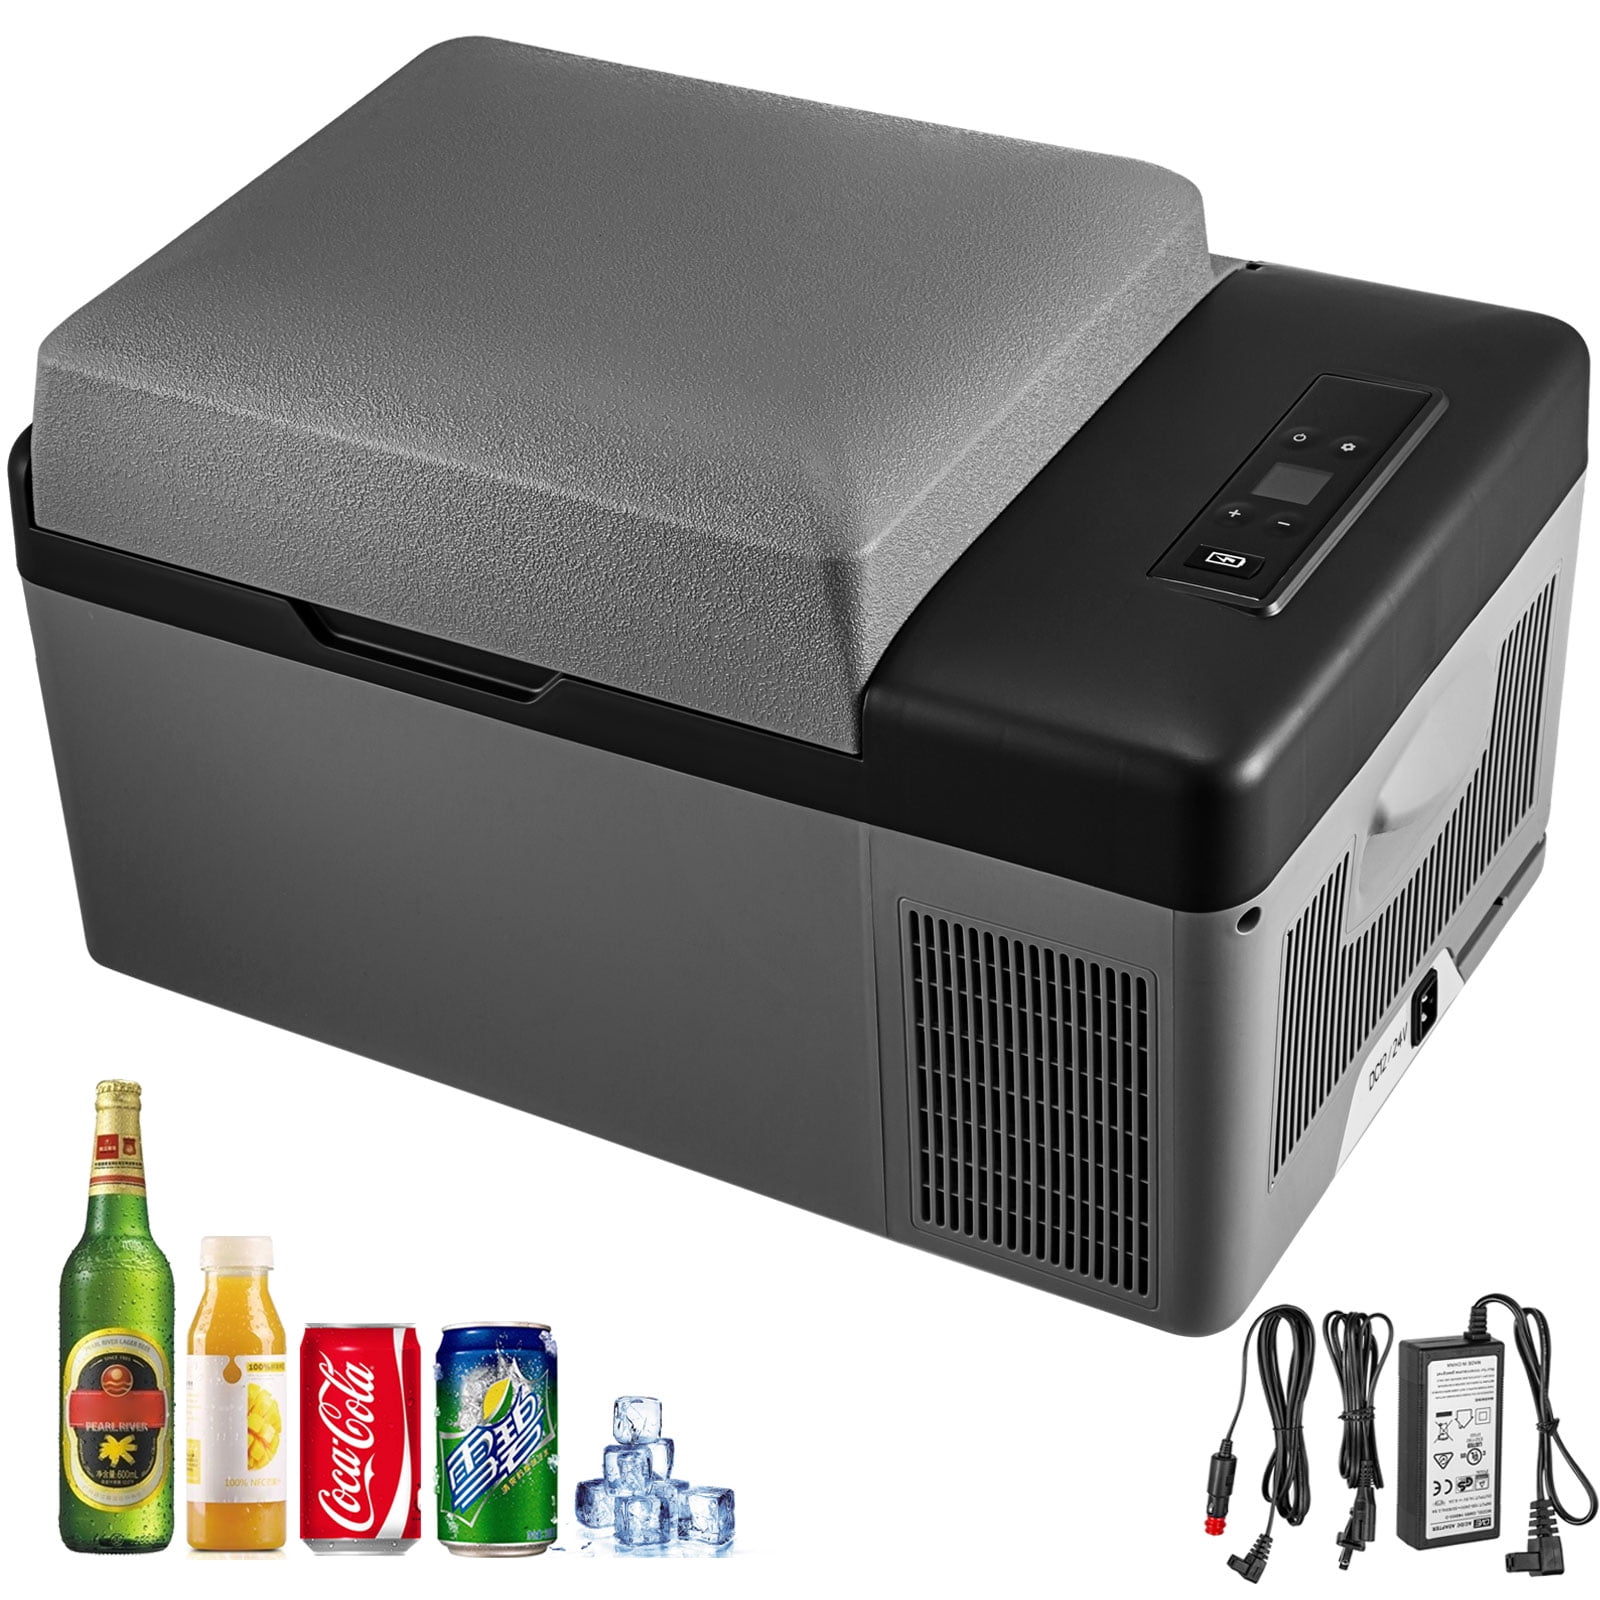 Details about   Brand New Pro A+20L 12/24V DC Portable Refrigerator for Vehicle,Car Truck Boat 